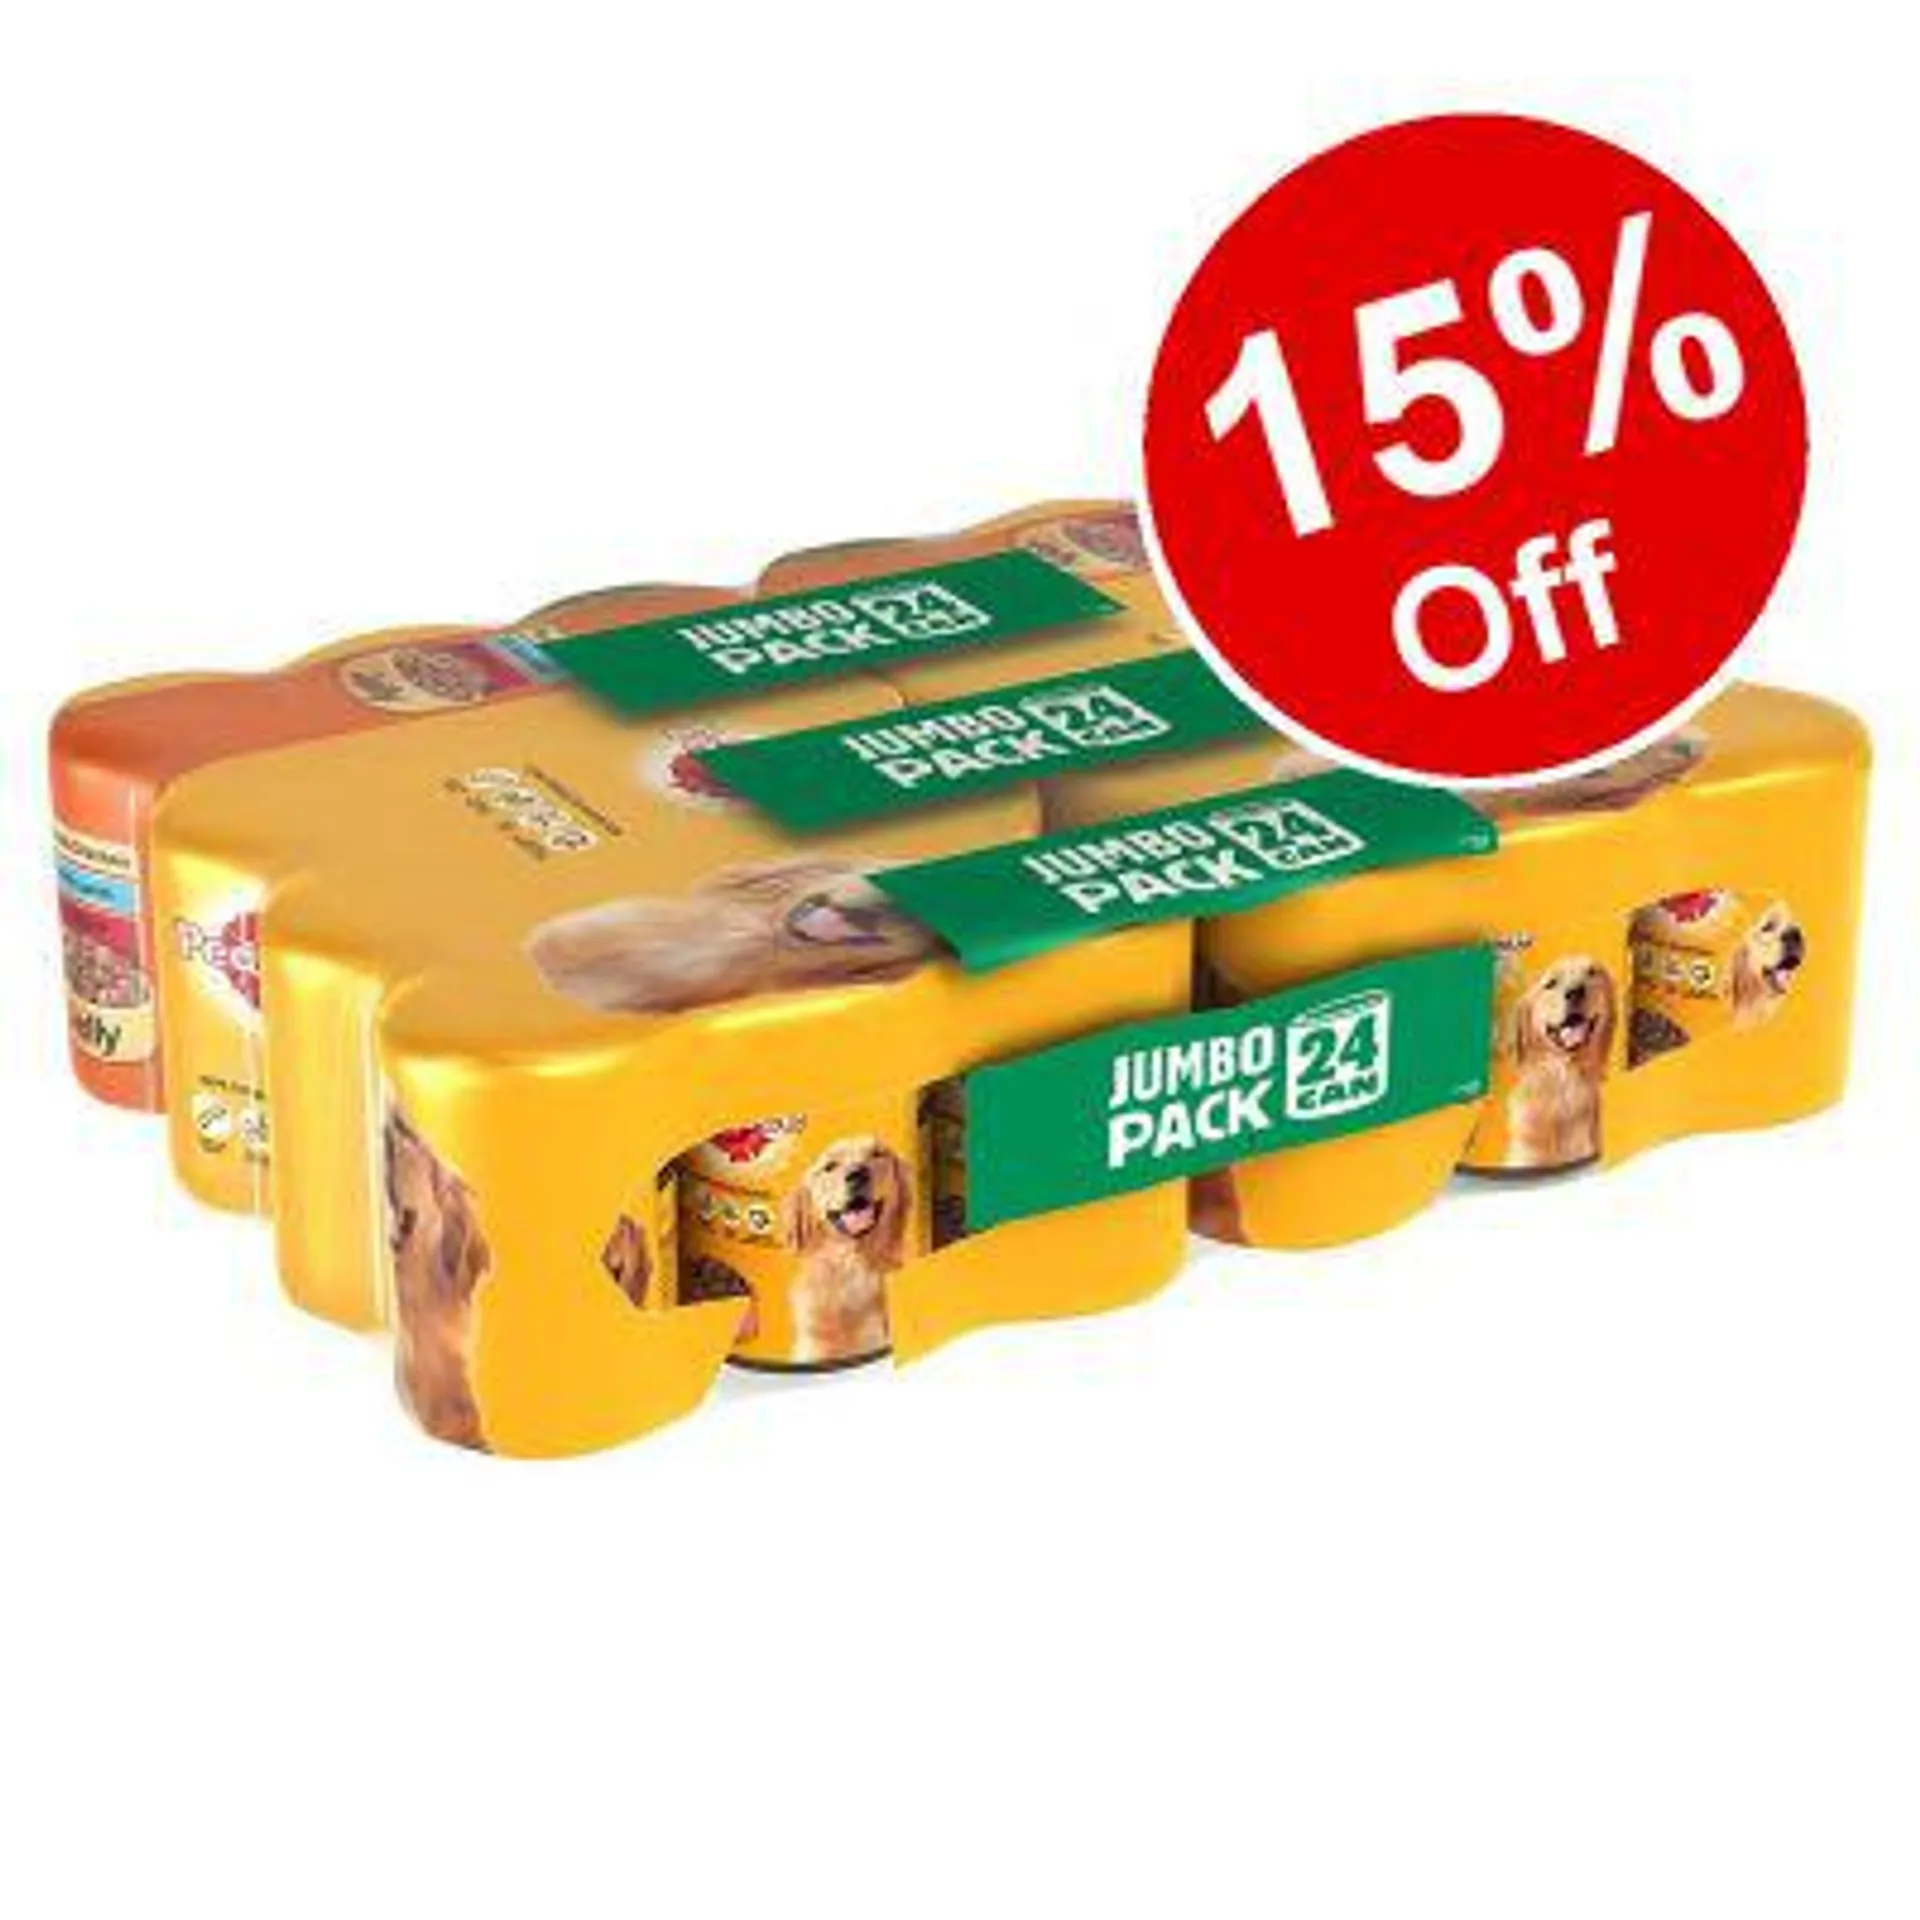 12 x 100g Pedigree Wet Dog Food Multipack Pouches - 15% Off!*